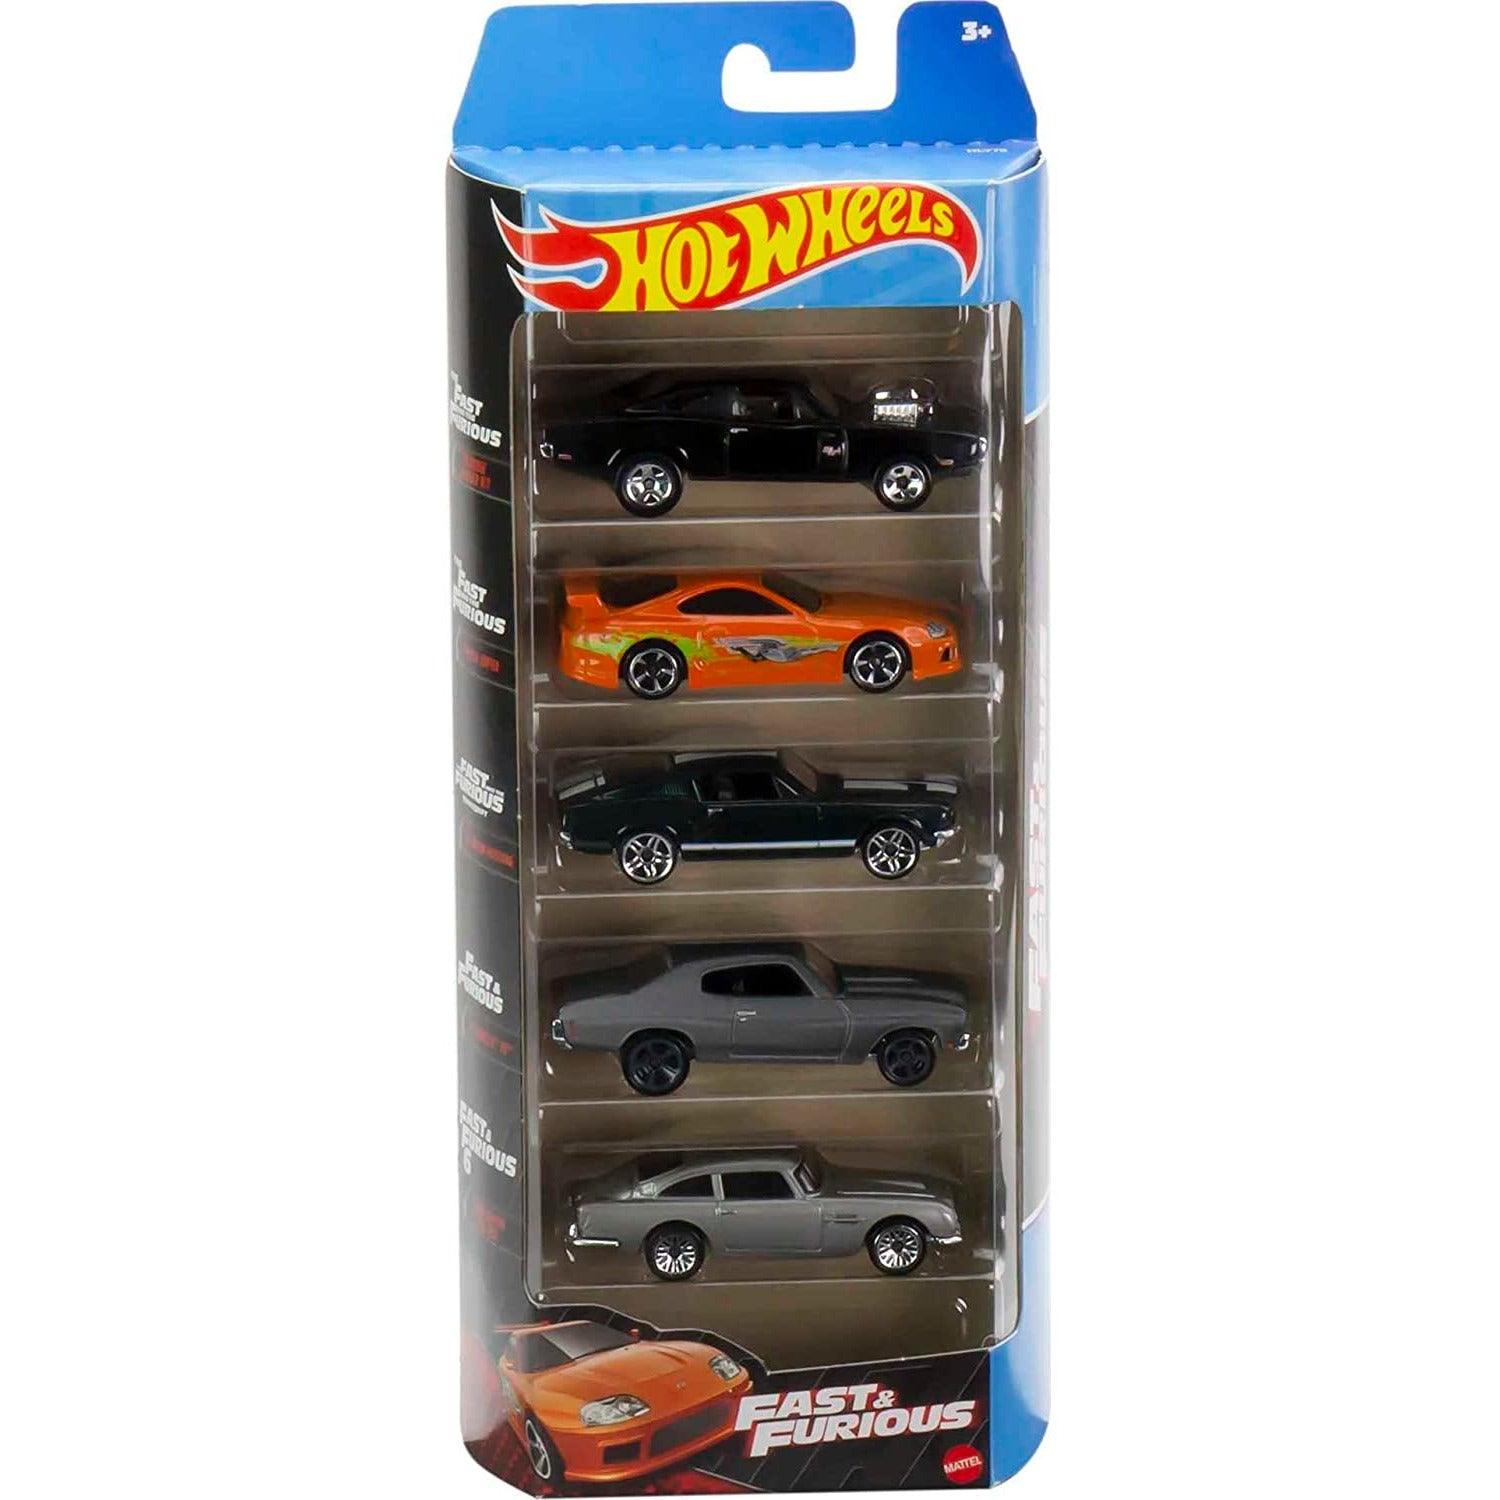 Hot Wheels Fast and Furious 5-Pack of Toy Race and Drift Cars in 1:64 Scale with Exclusive Decos (Styles May Vary) - BumbleToys - 2-4 Years, 5-7 Years, Boys, Collectible Vehicles